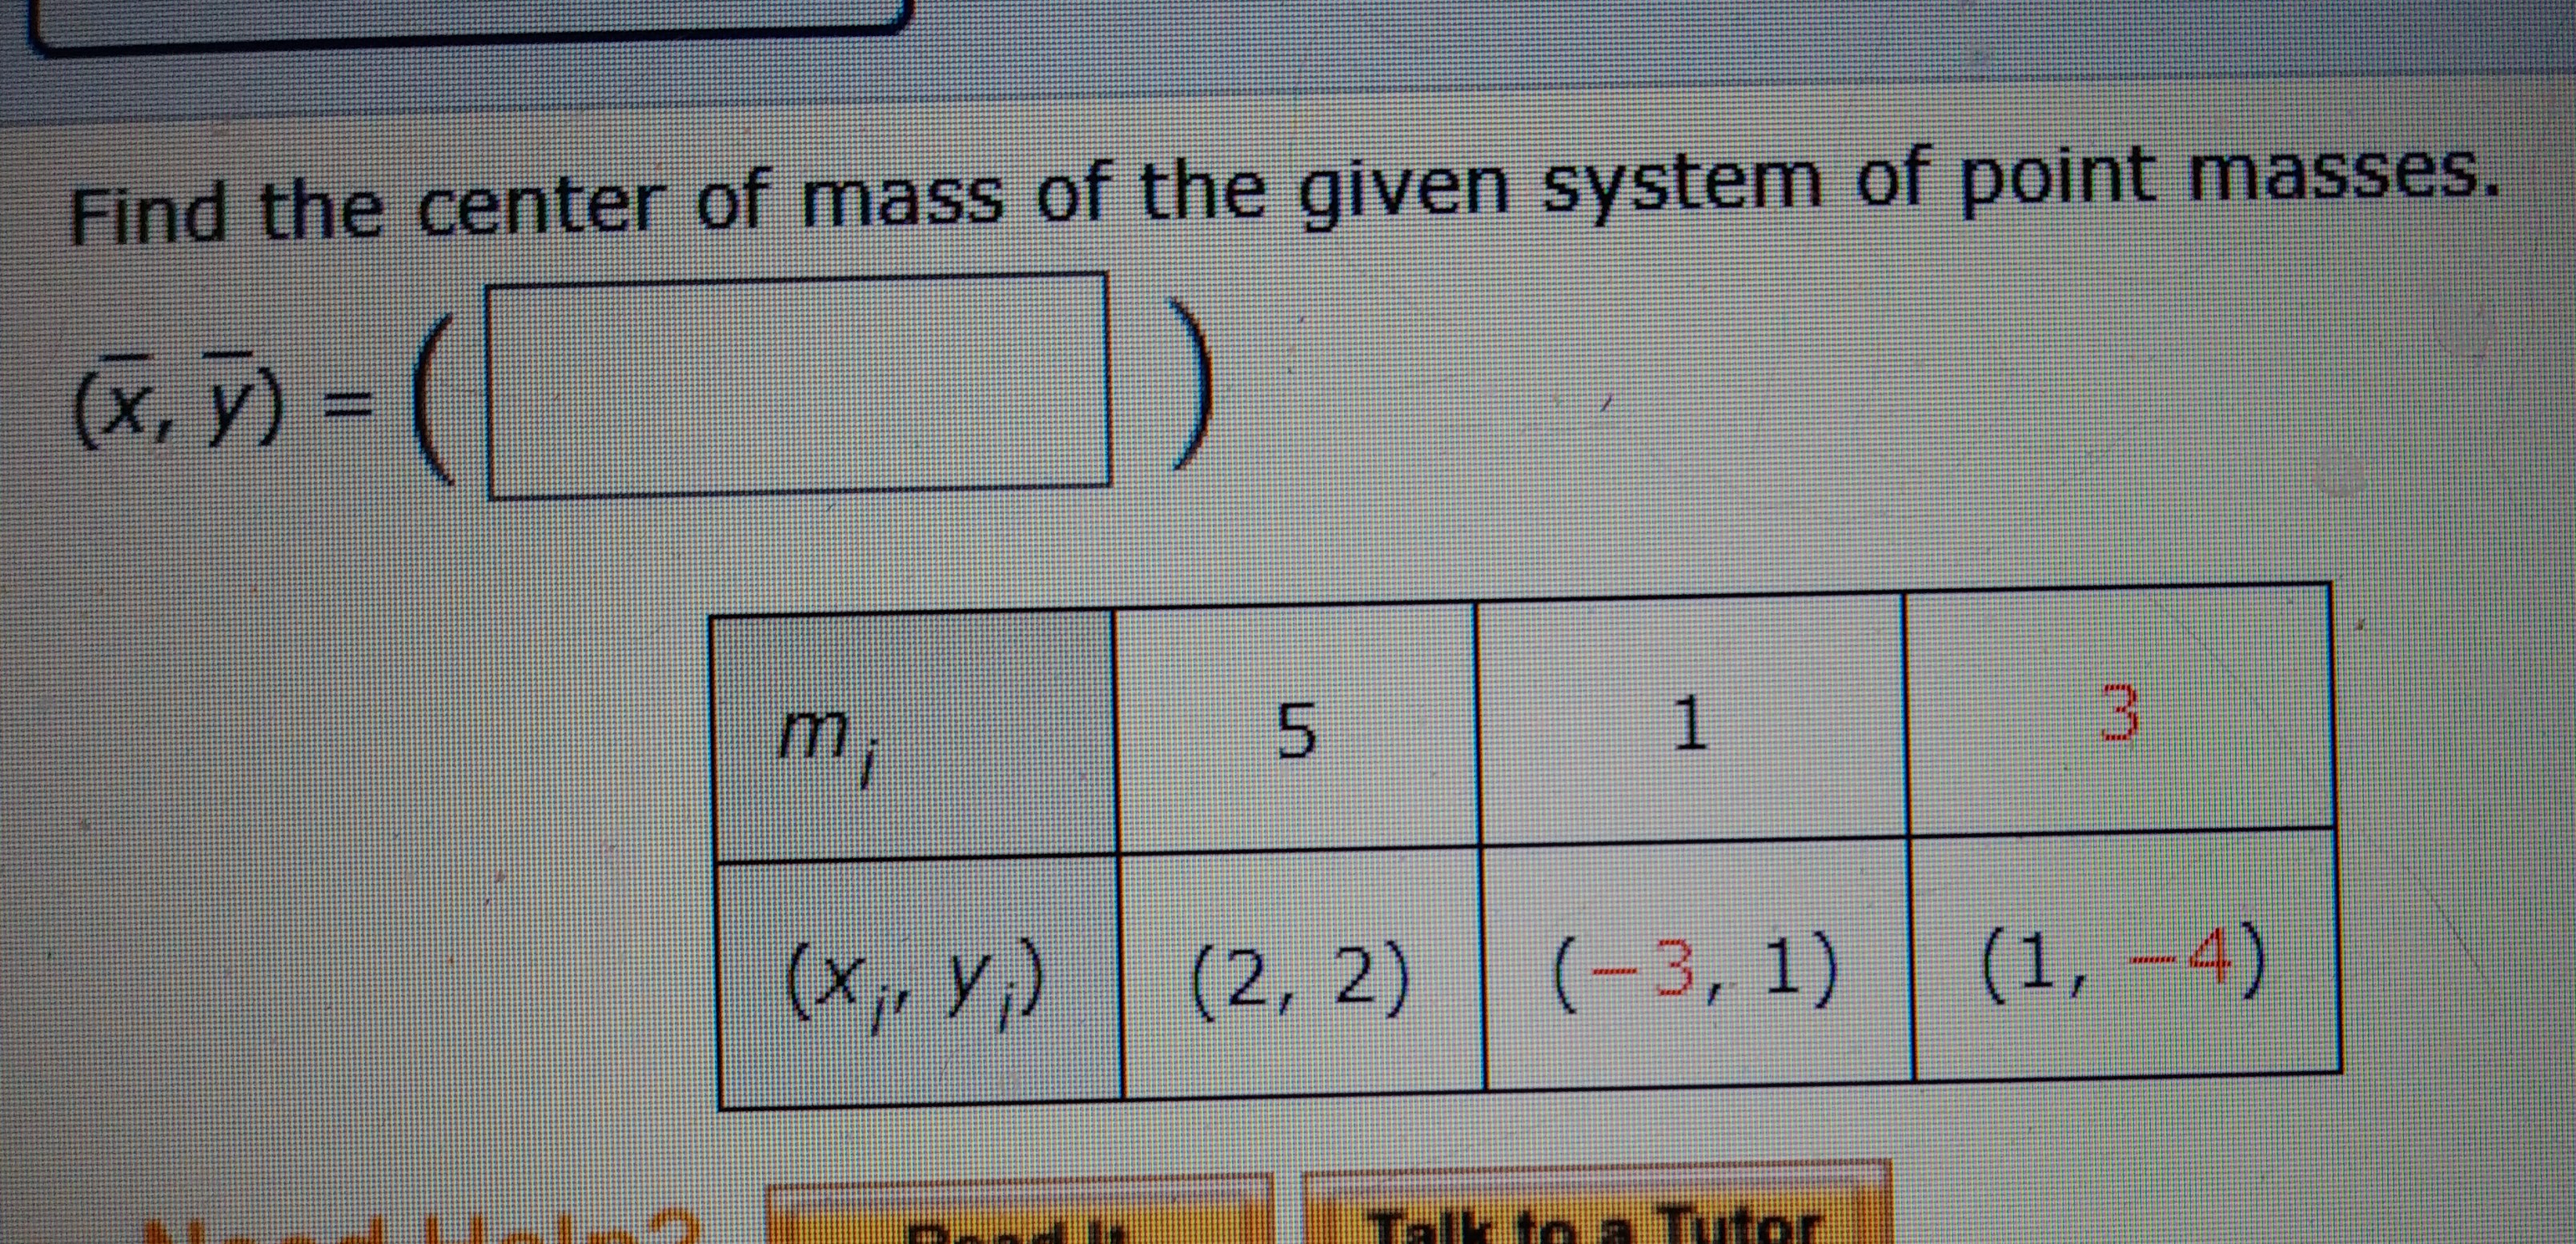 Find the center of mass of the given system of point masses.
(x, y) = (|
m,
5n
1
(X,, Y;)
(2, 2)
(-3, 1)
(1, –4)
Talk to a Tutor.
3.
